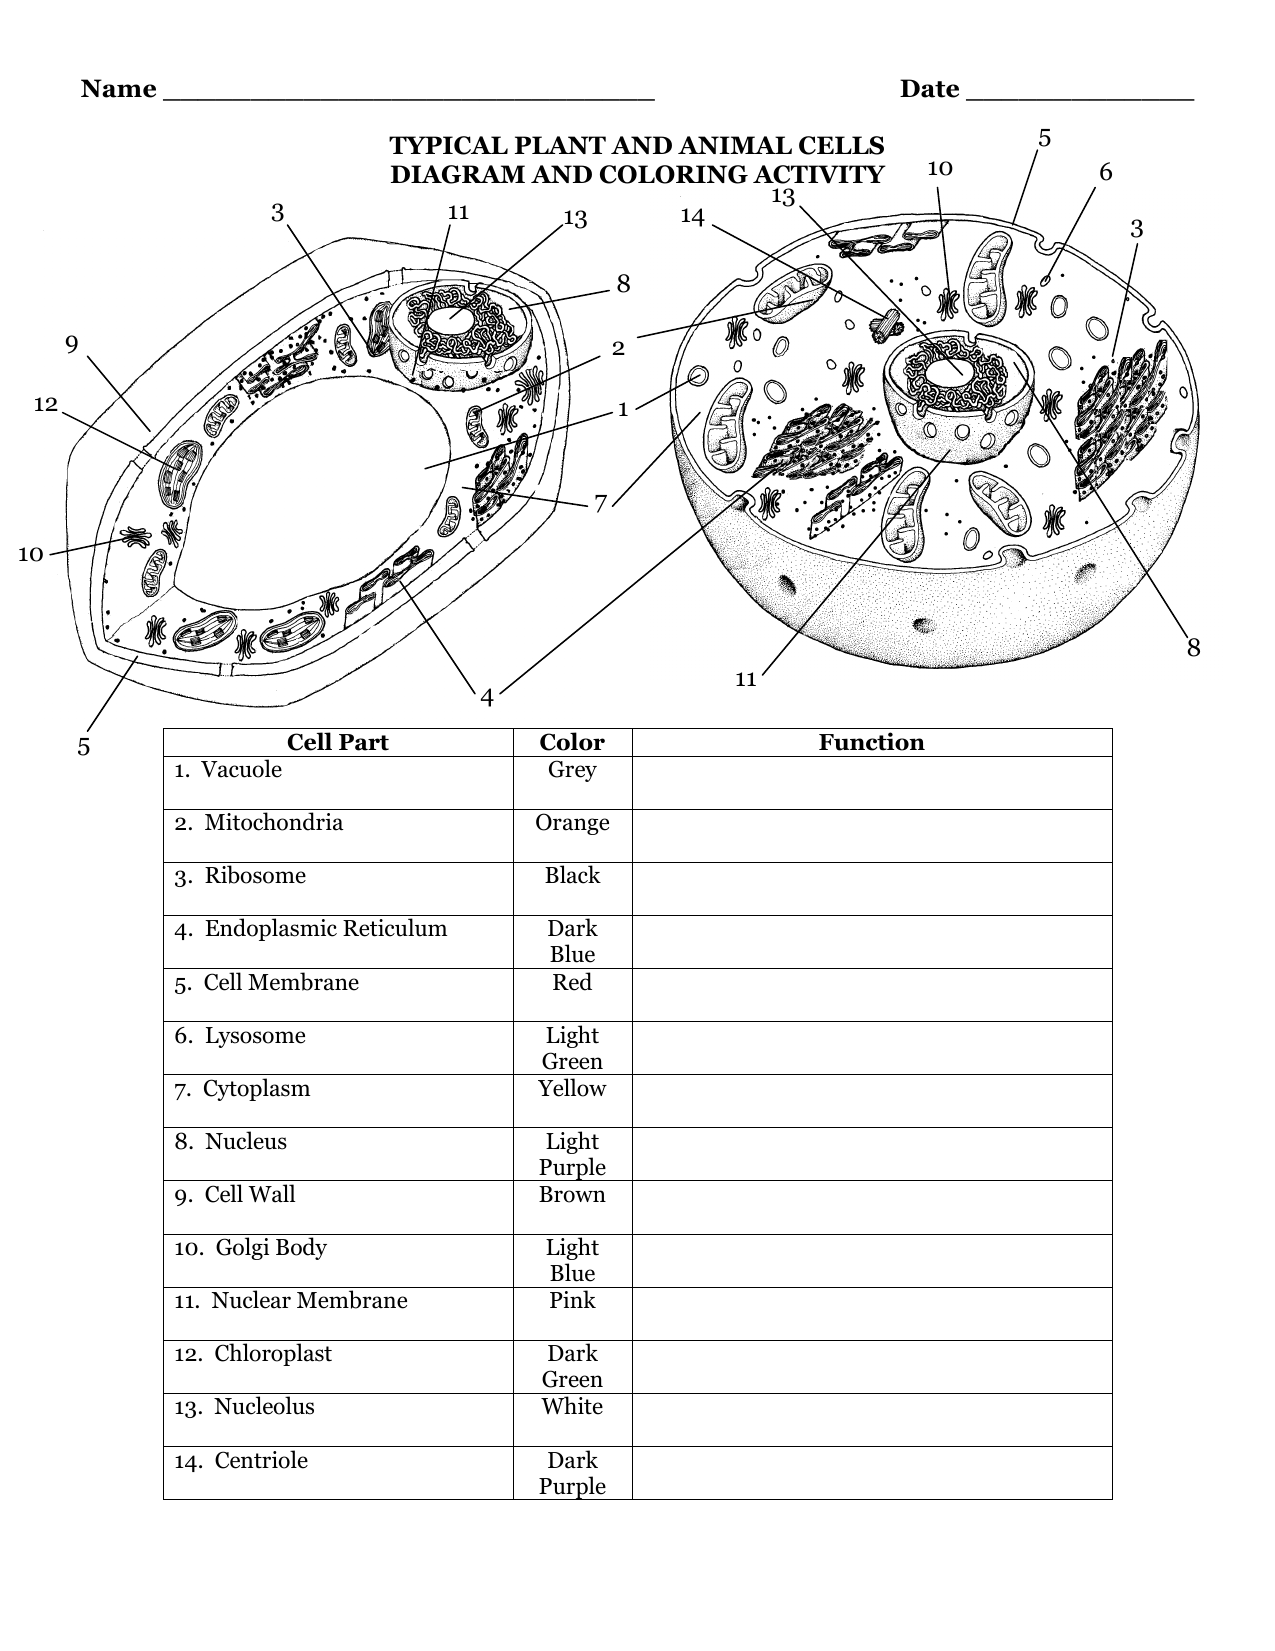 TYPICAL PLANT AND ANIMAL CELLS DIAGRAM AND COLORING Pertaining To Animal Cell Worksheet Answers